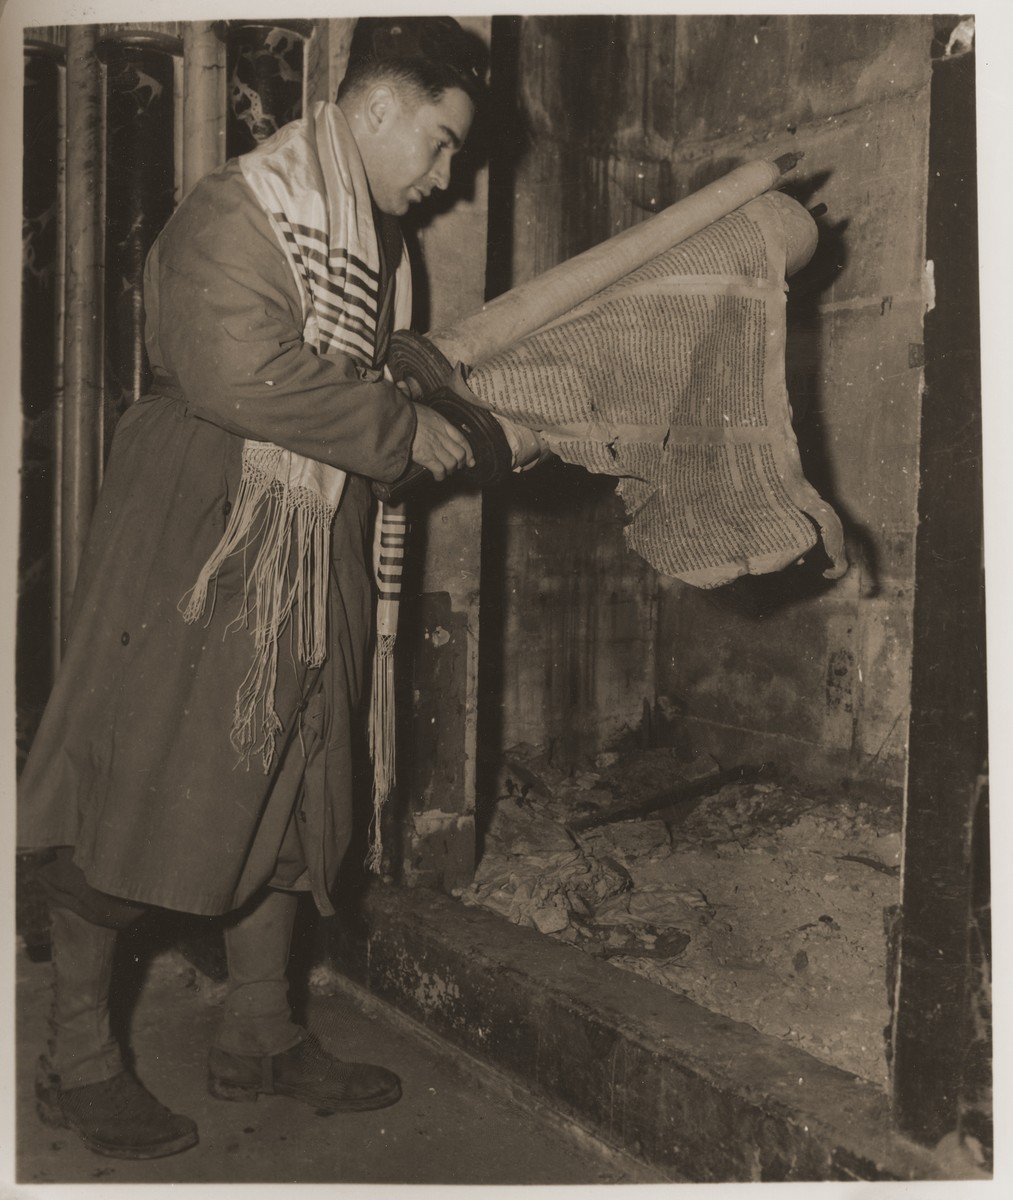 U.S. Army chaplain Herman Dicker from Brooklyn, N.Y., examines a damaged Torah scroll in the ark of the destroyed synagogue in Metz.